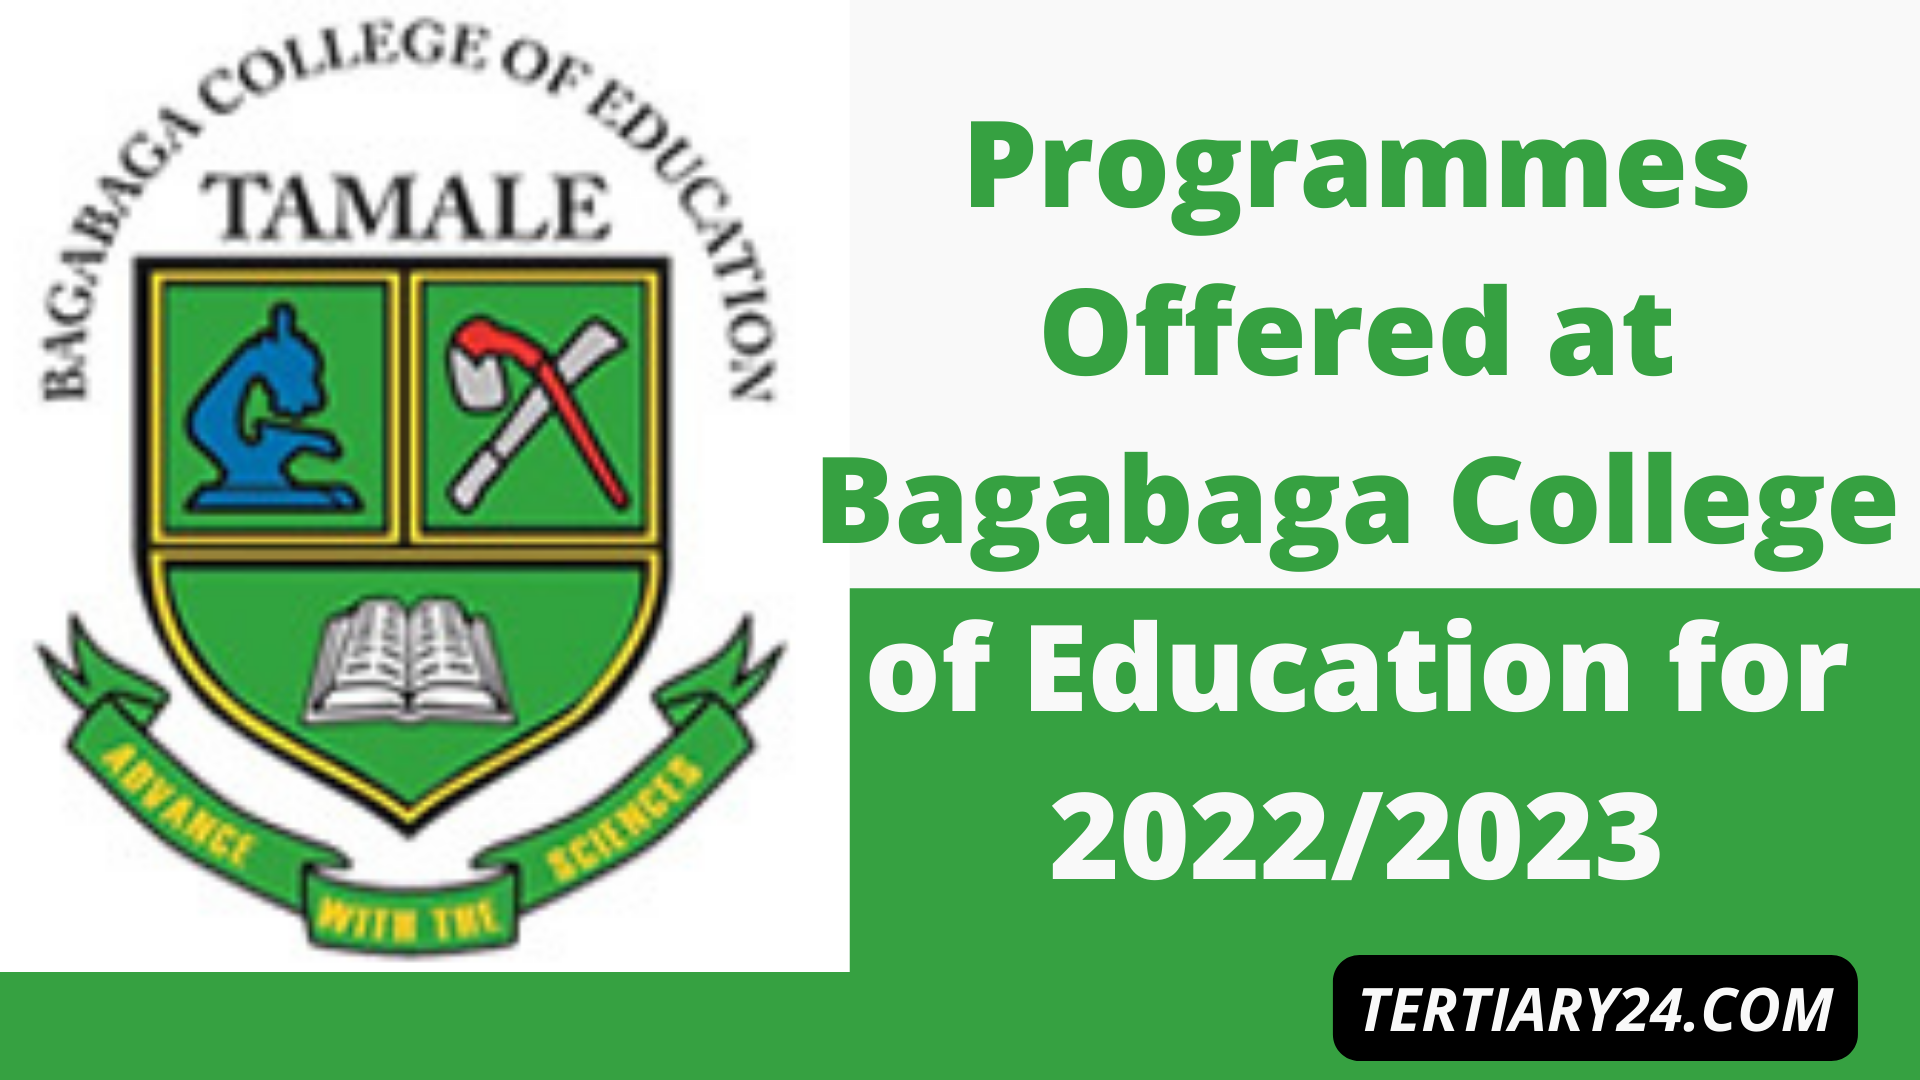 Programmes Offered at Bagabaga College of Education for 2022/2023